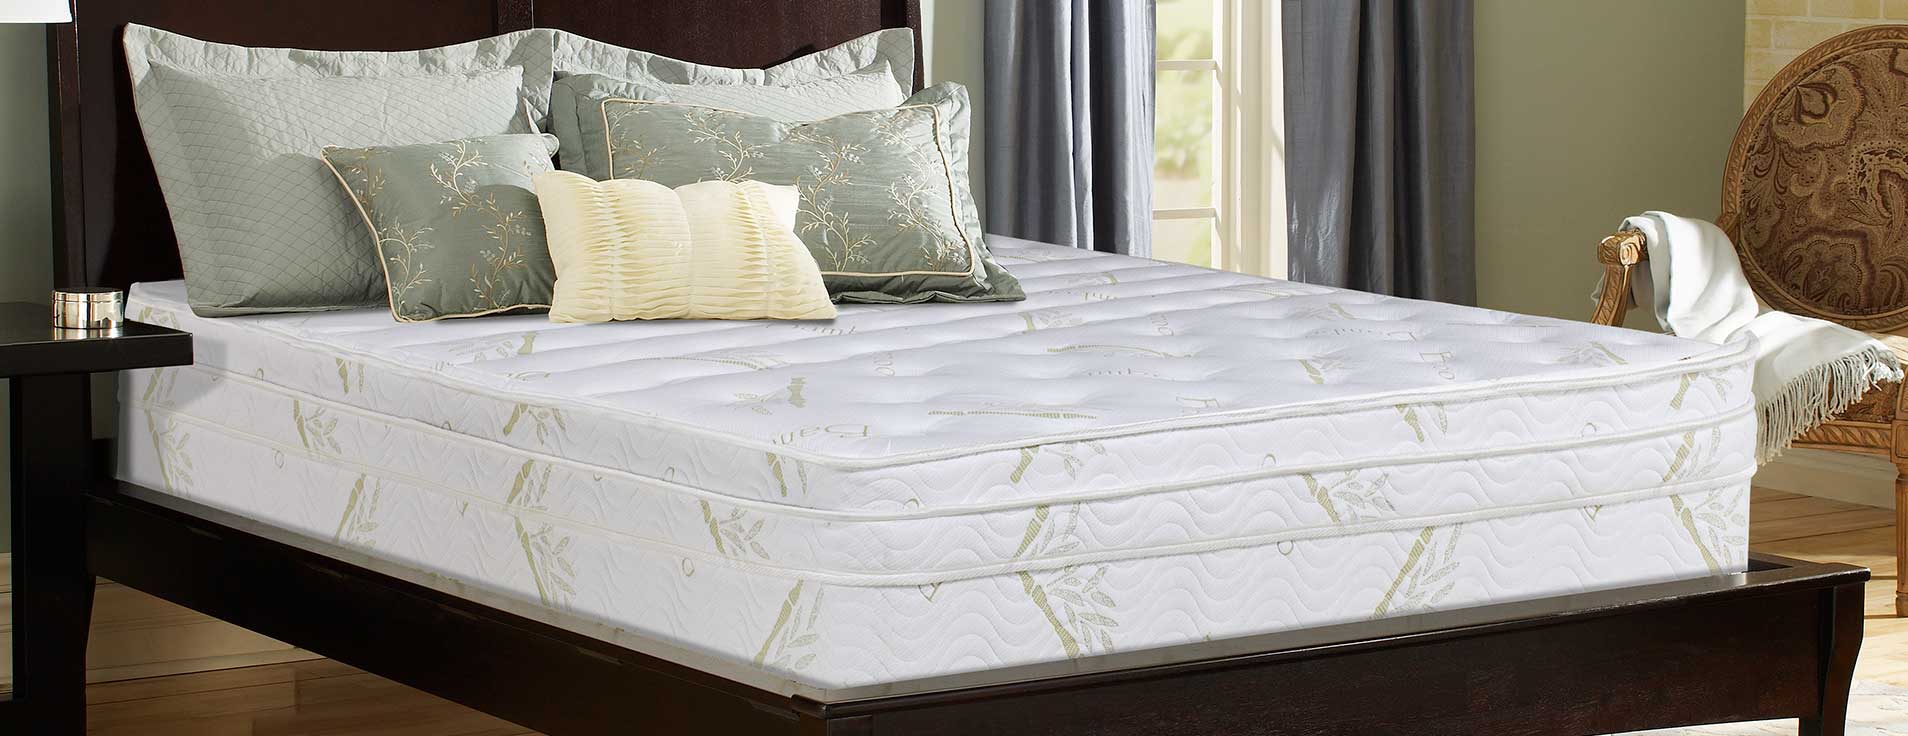 boyd waterbed mattress review